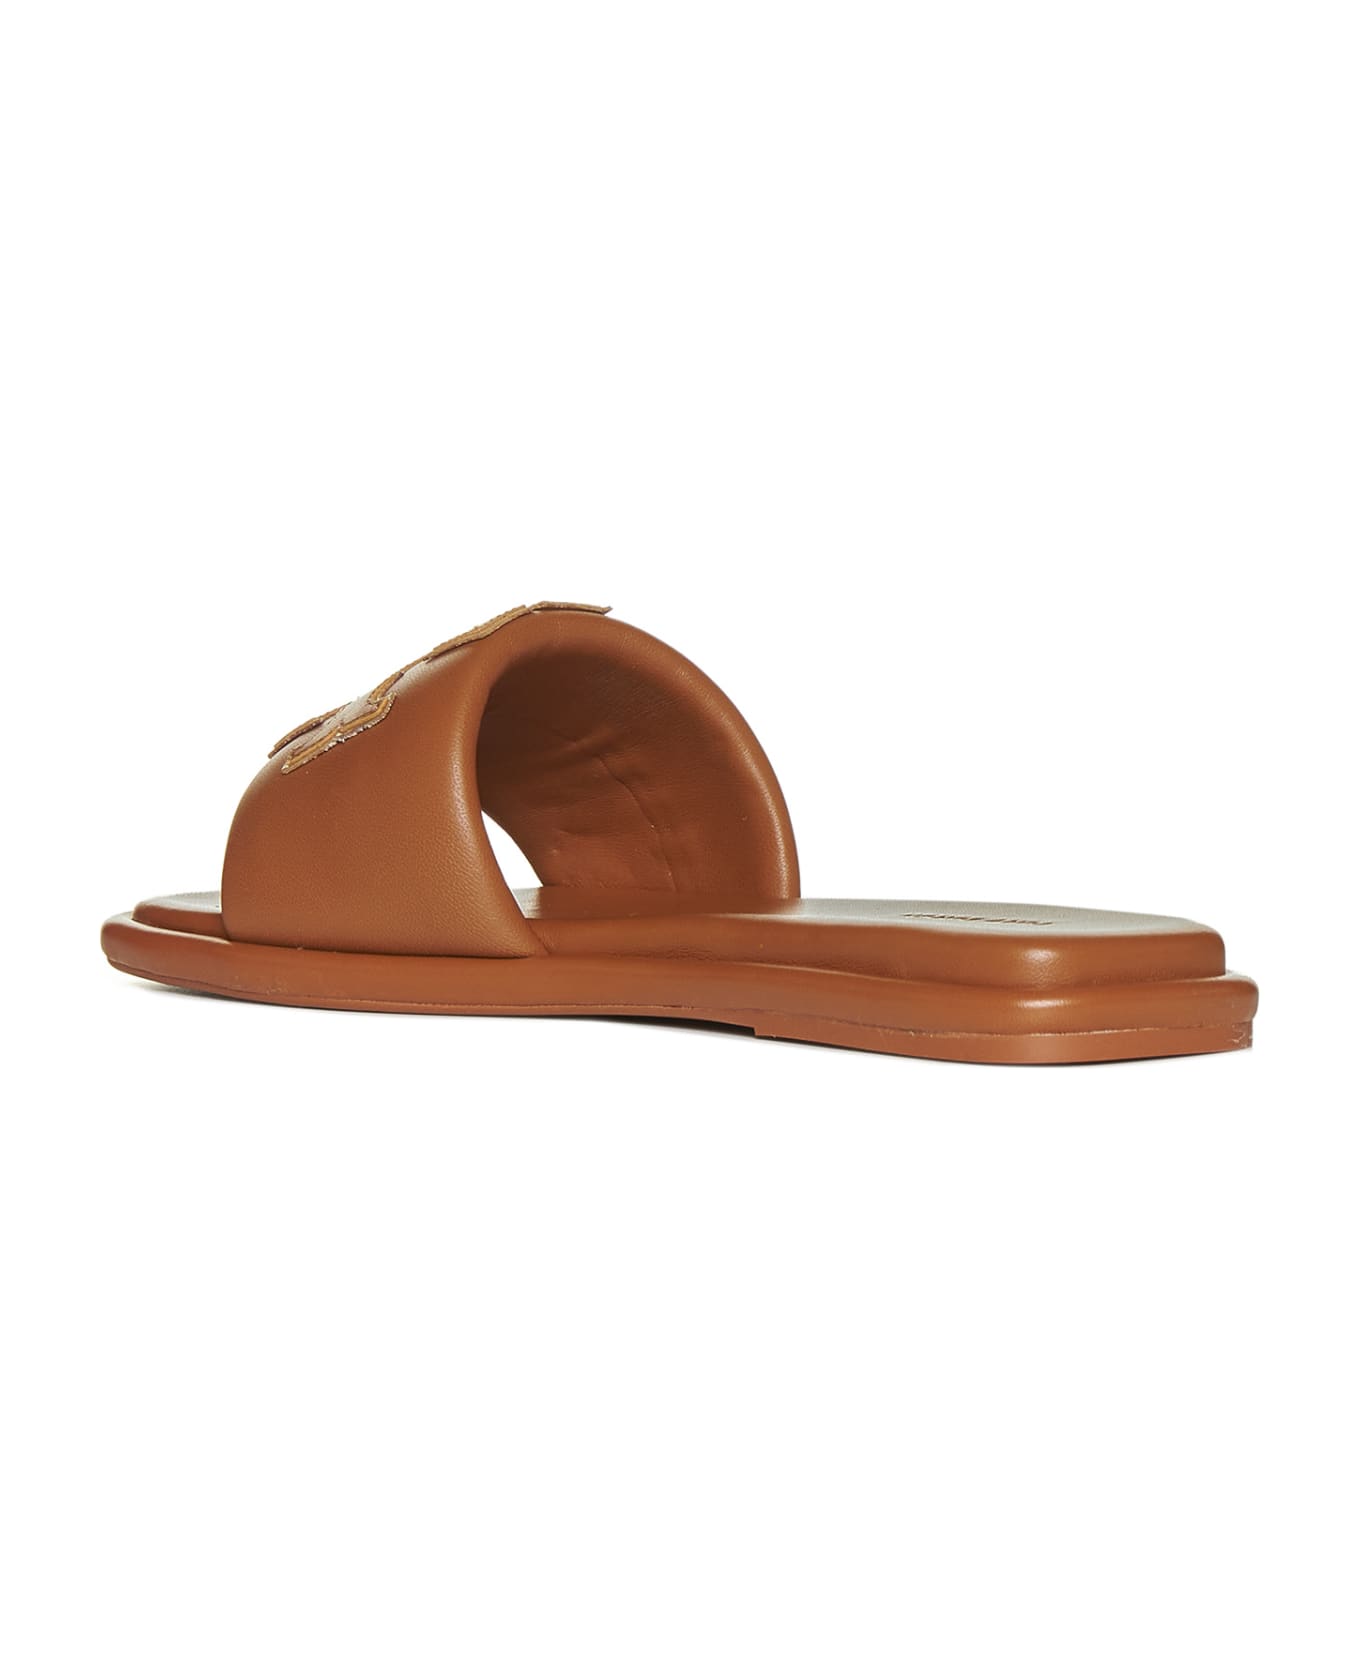 Tory Burch Double T Leather Slides - Brown サンダル